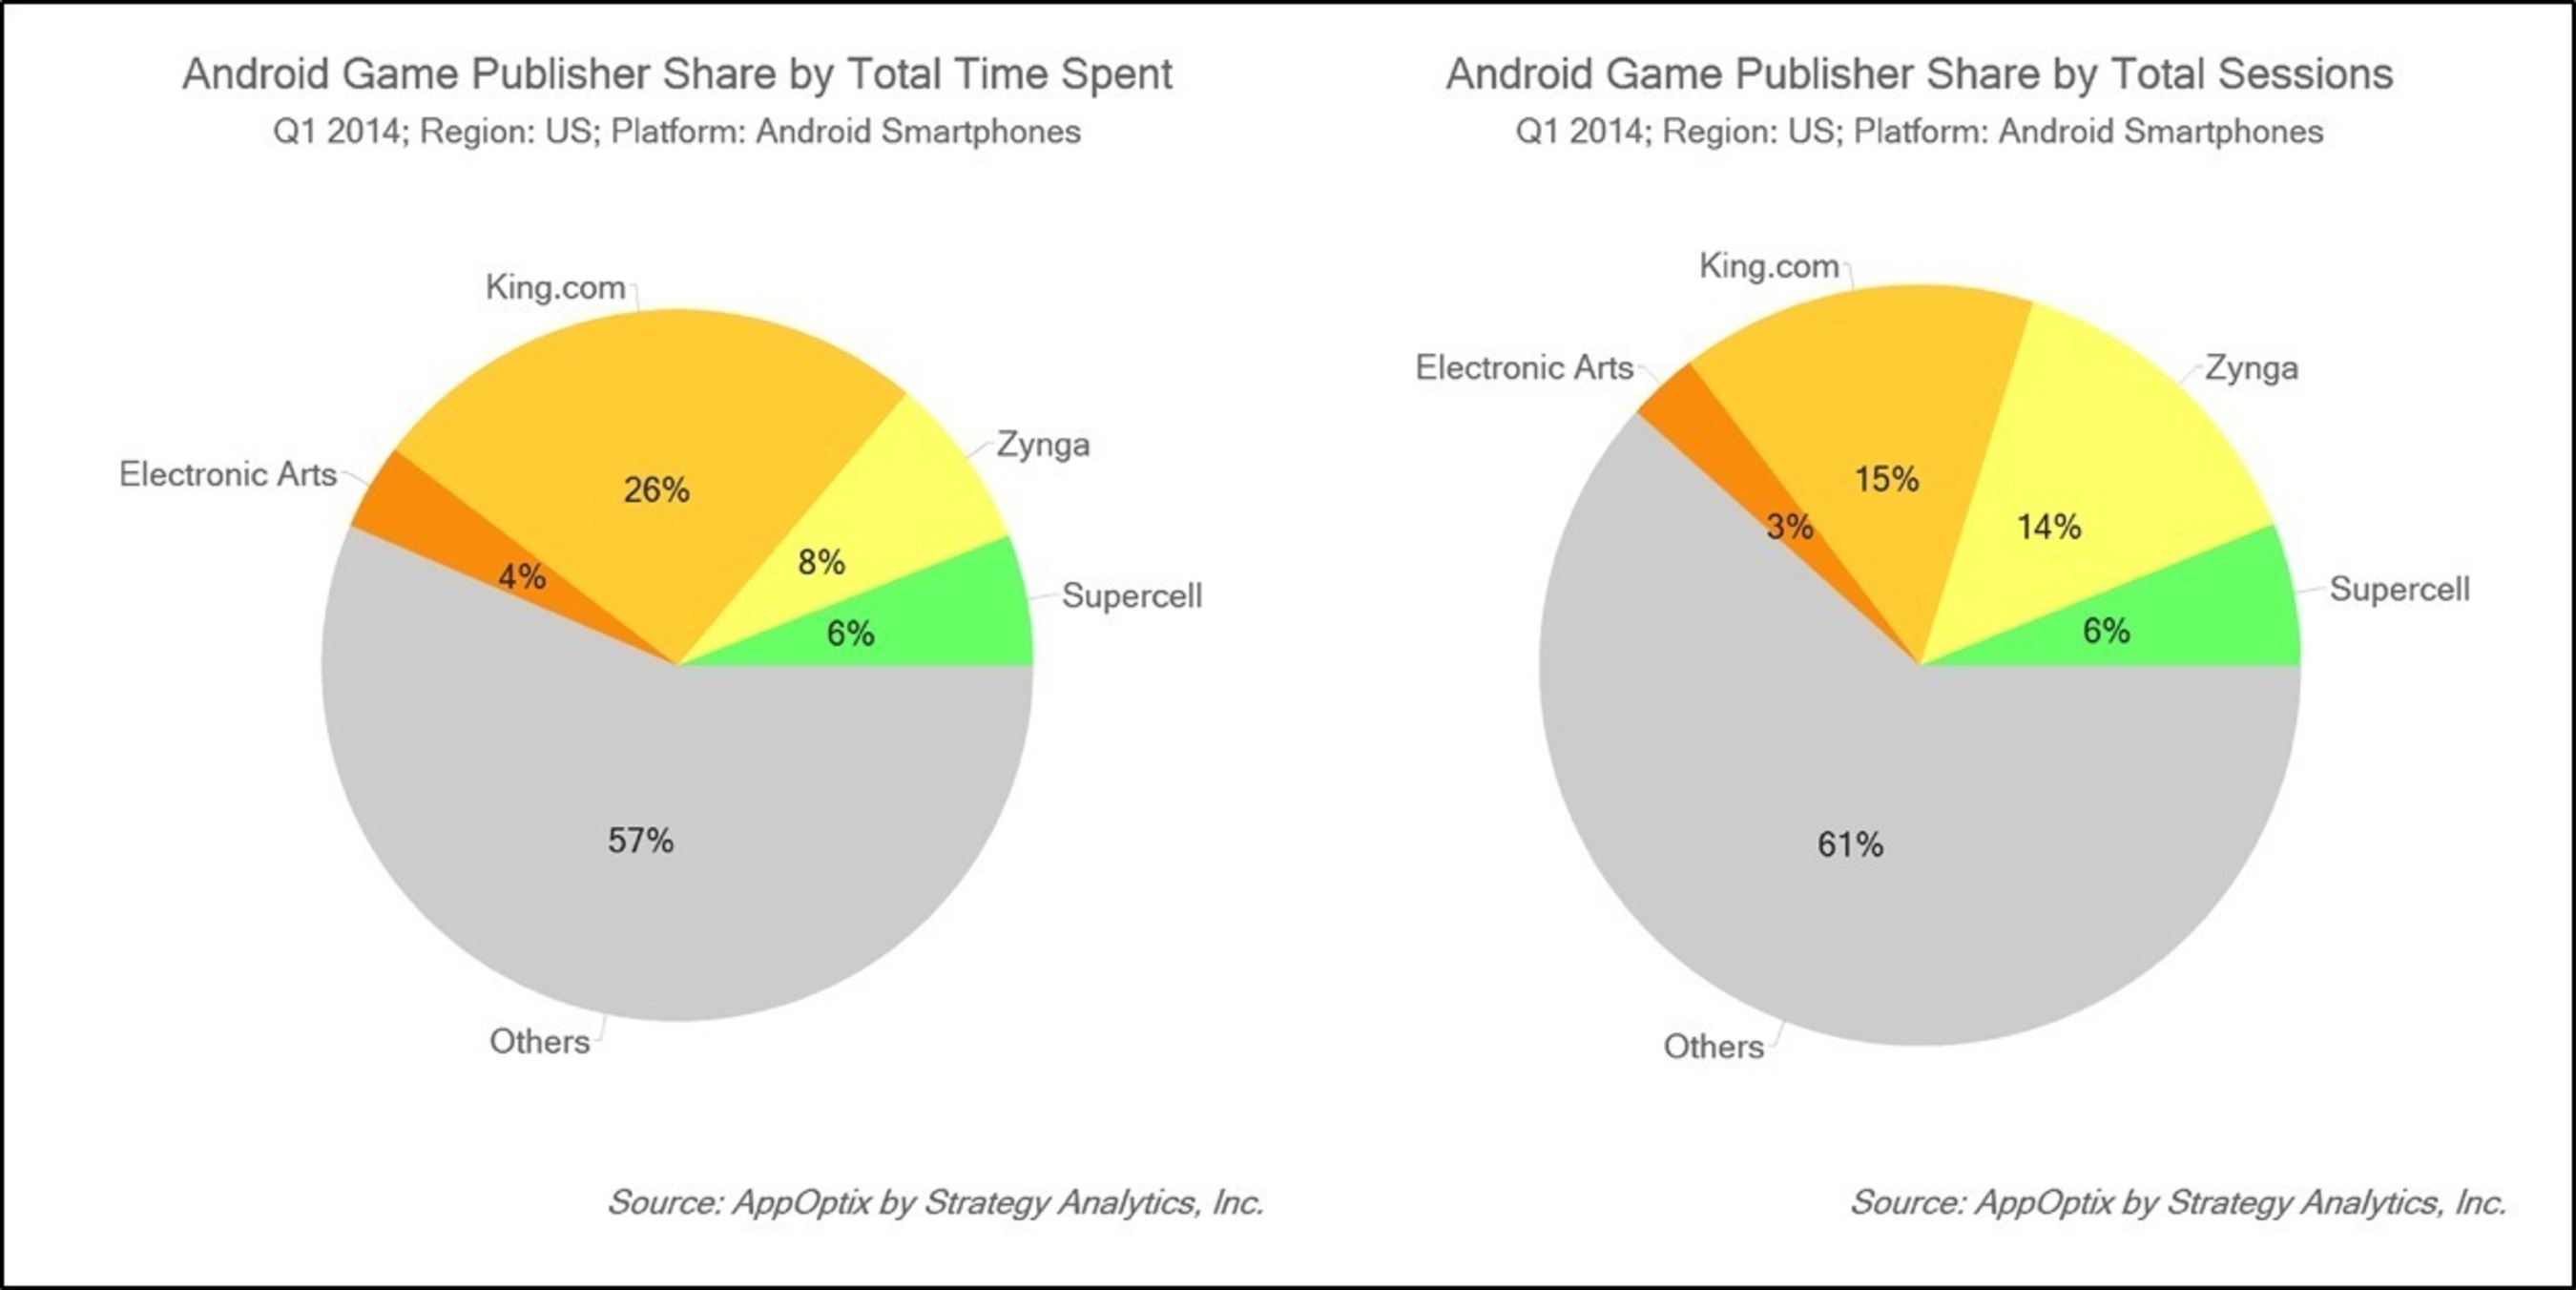 Android Game Publisher Share by Total Time Spent and Android Game Publisher Share by Total Sessions - Source: AppOptix by Strategy Analytics, Inc. (PRNewsFoto/Strategy Analytics)